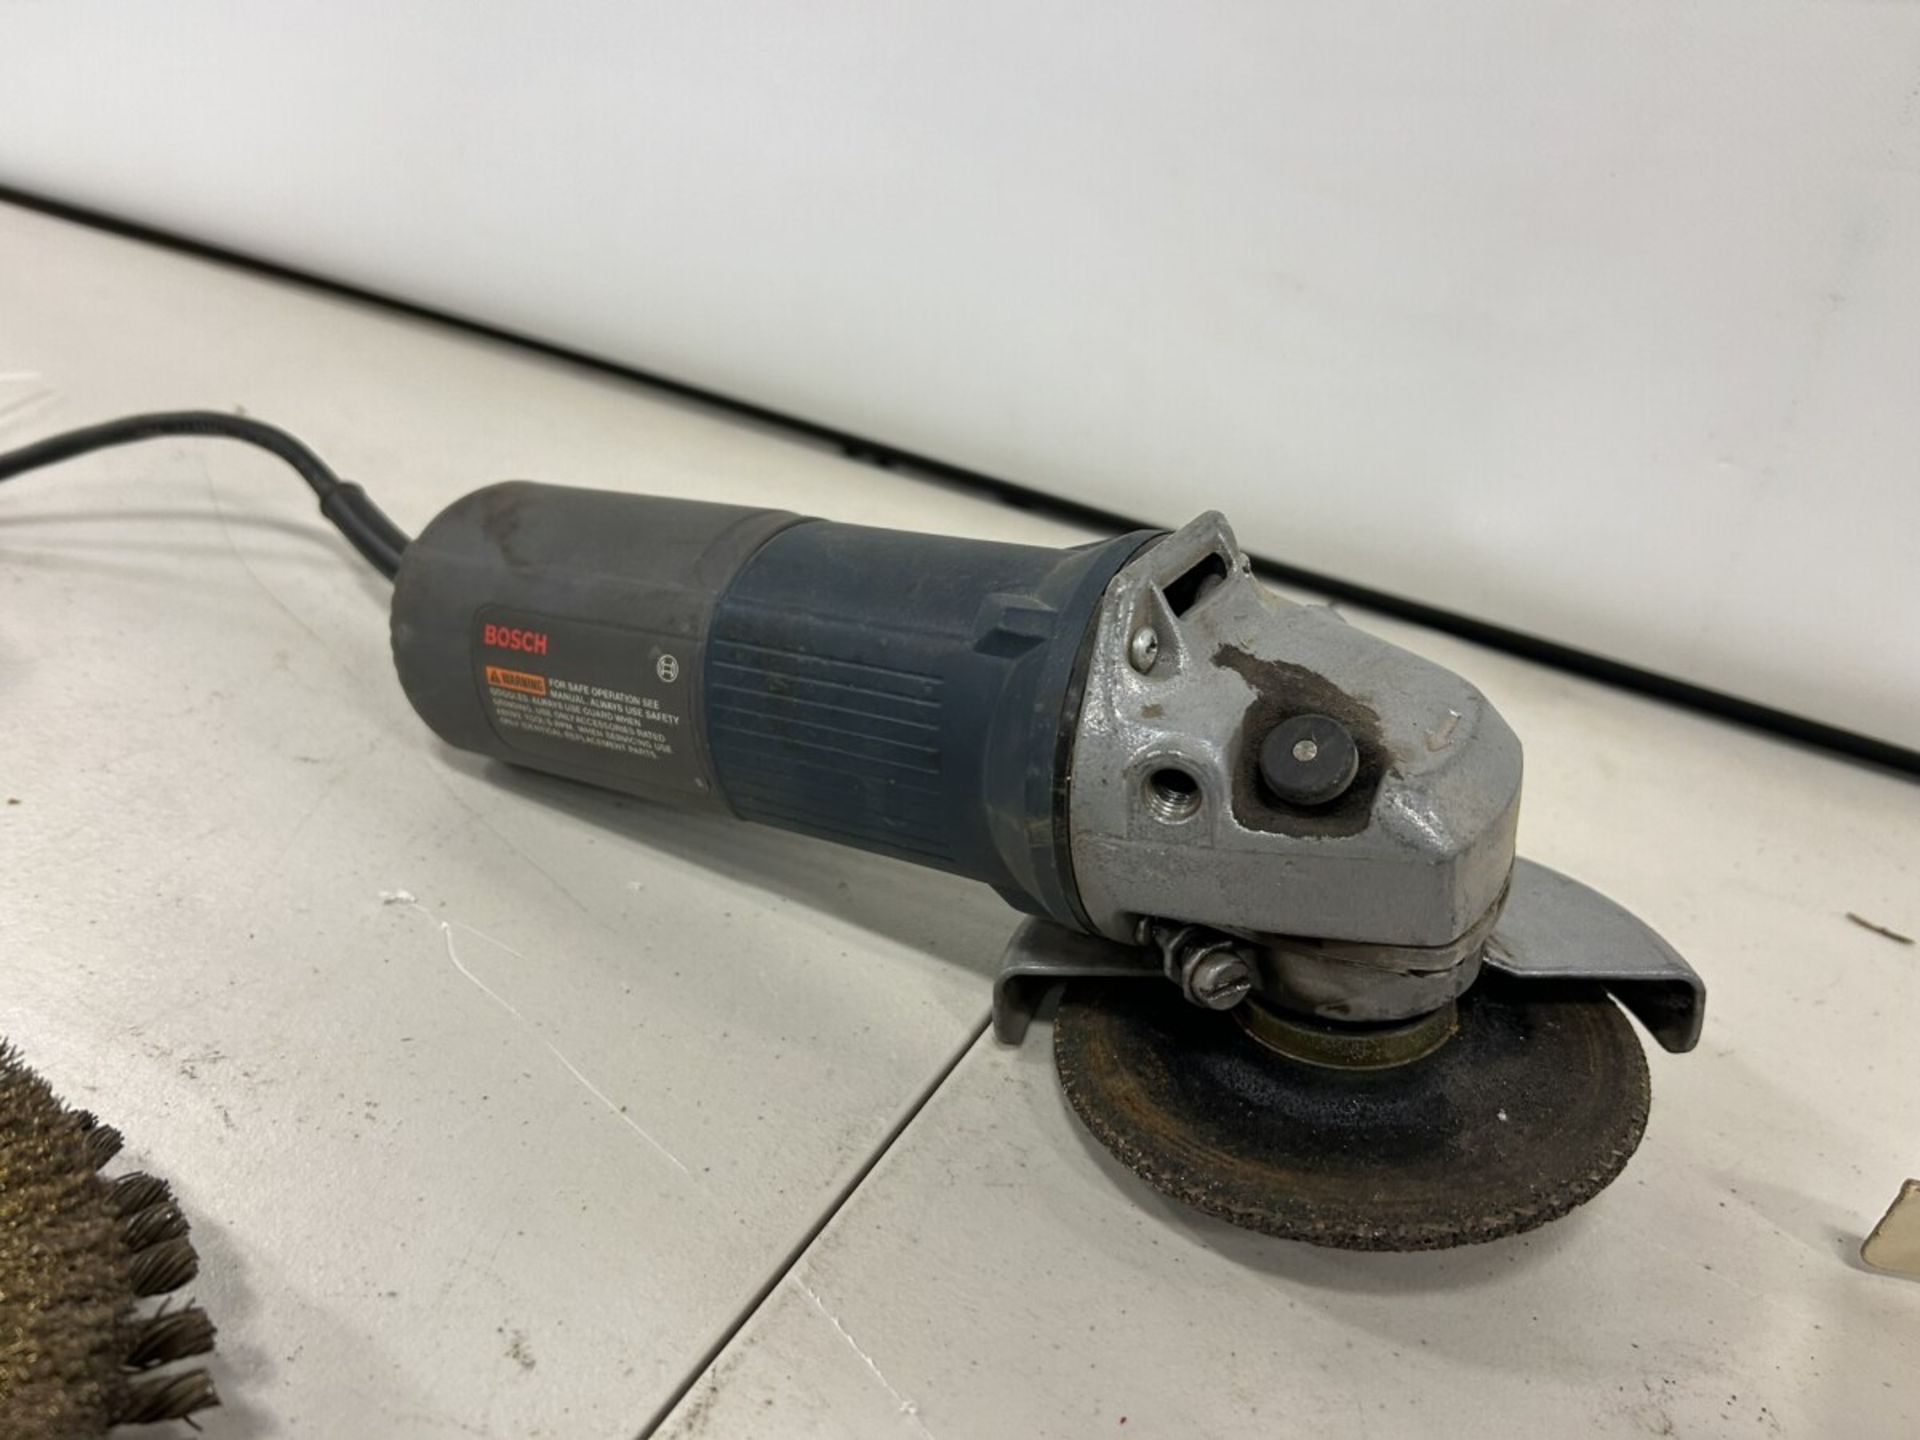 BOSCH 4-1/2 ANGLE GRINDER W/ASSORTED DISCS - Image 2 of 4